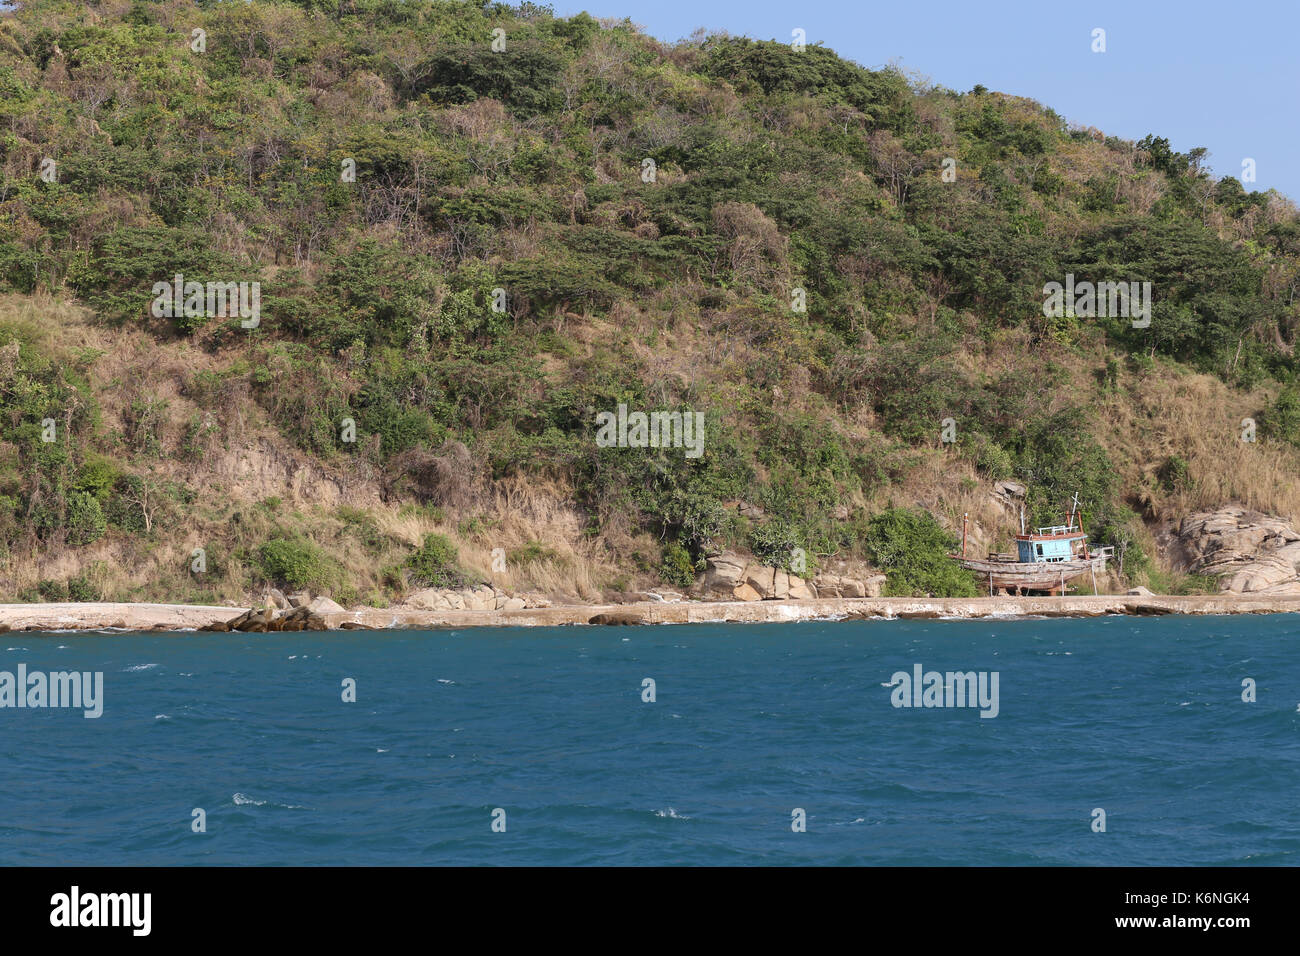 Deserted island in the sea of Tropical Area chonburi province in thailand. Stock Photo